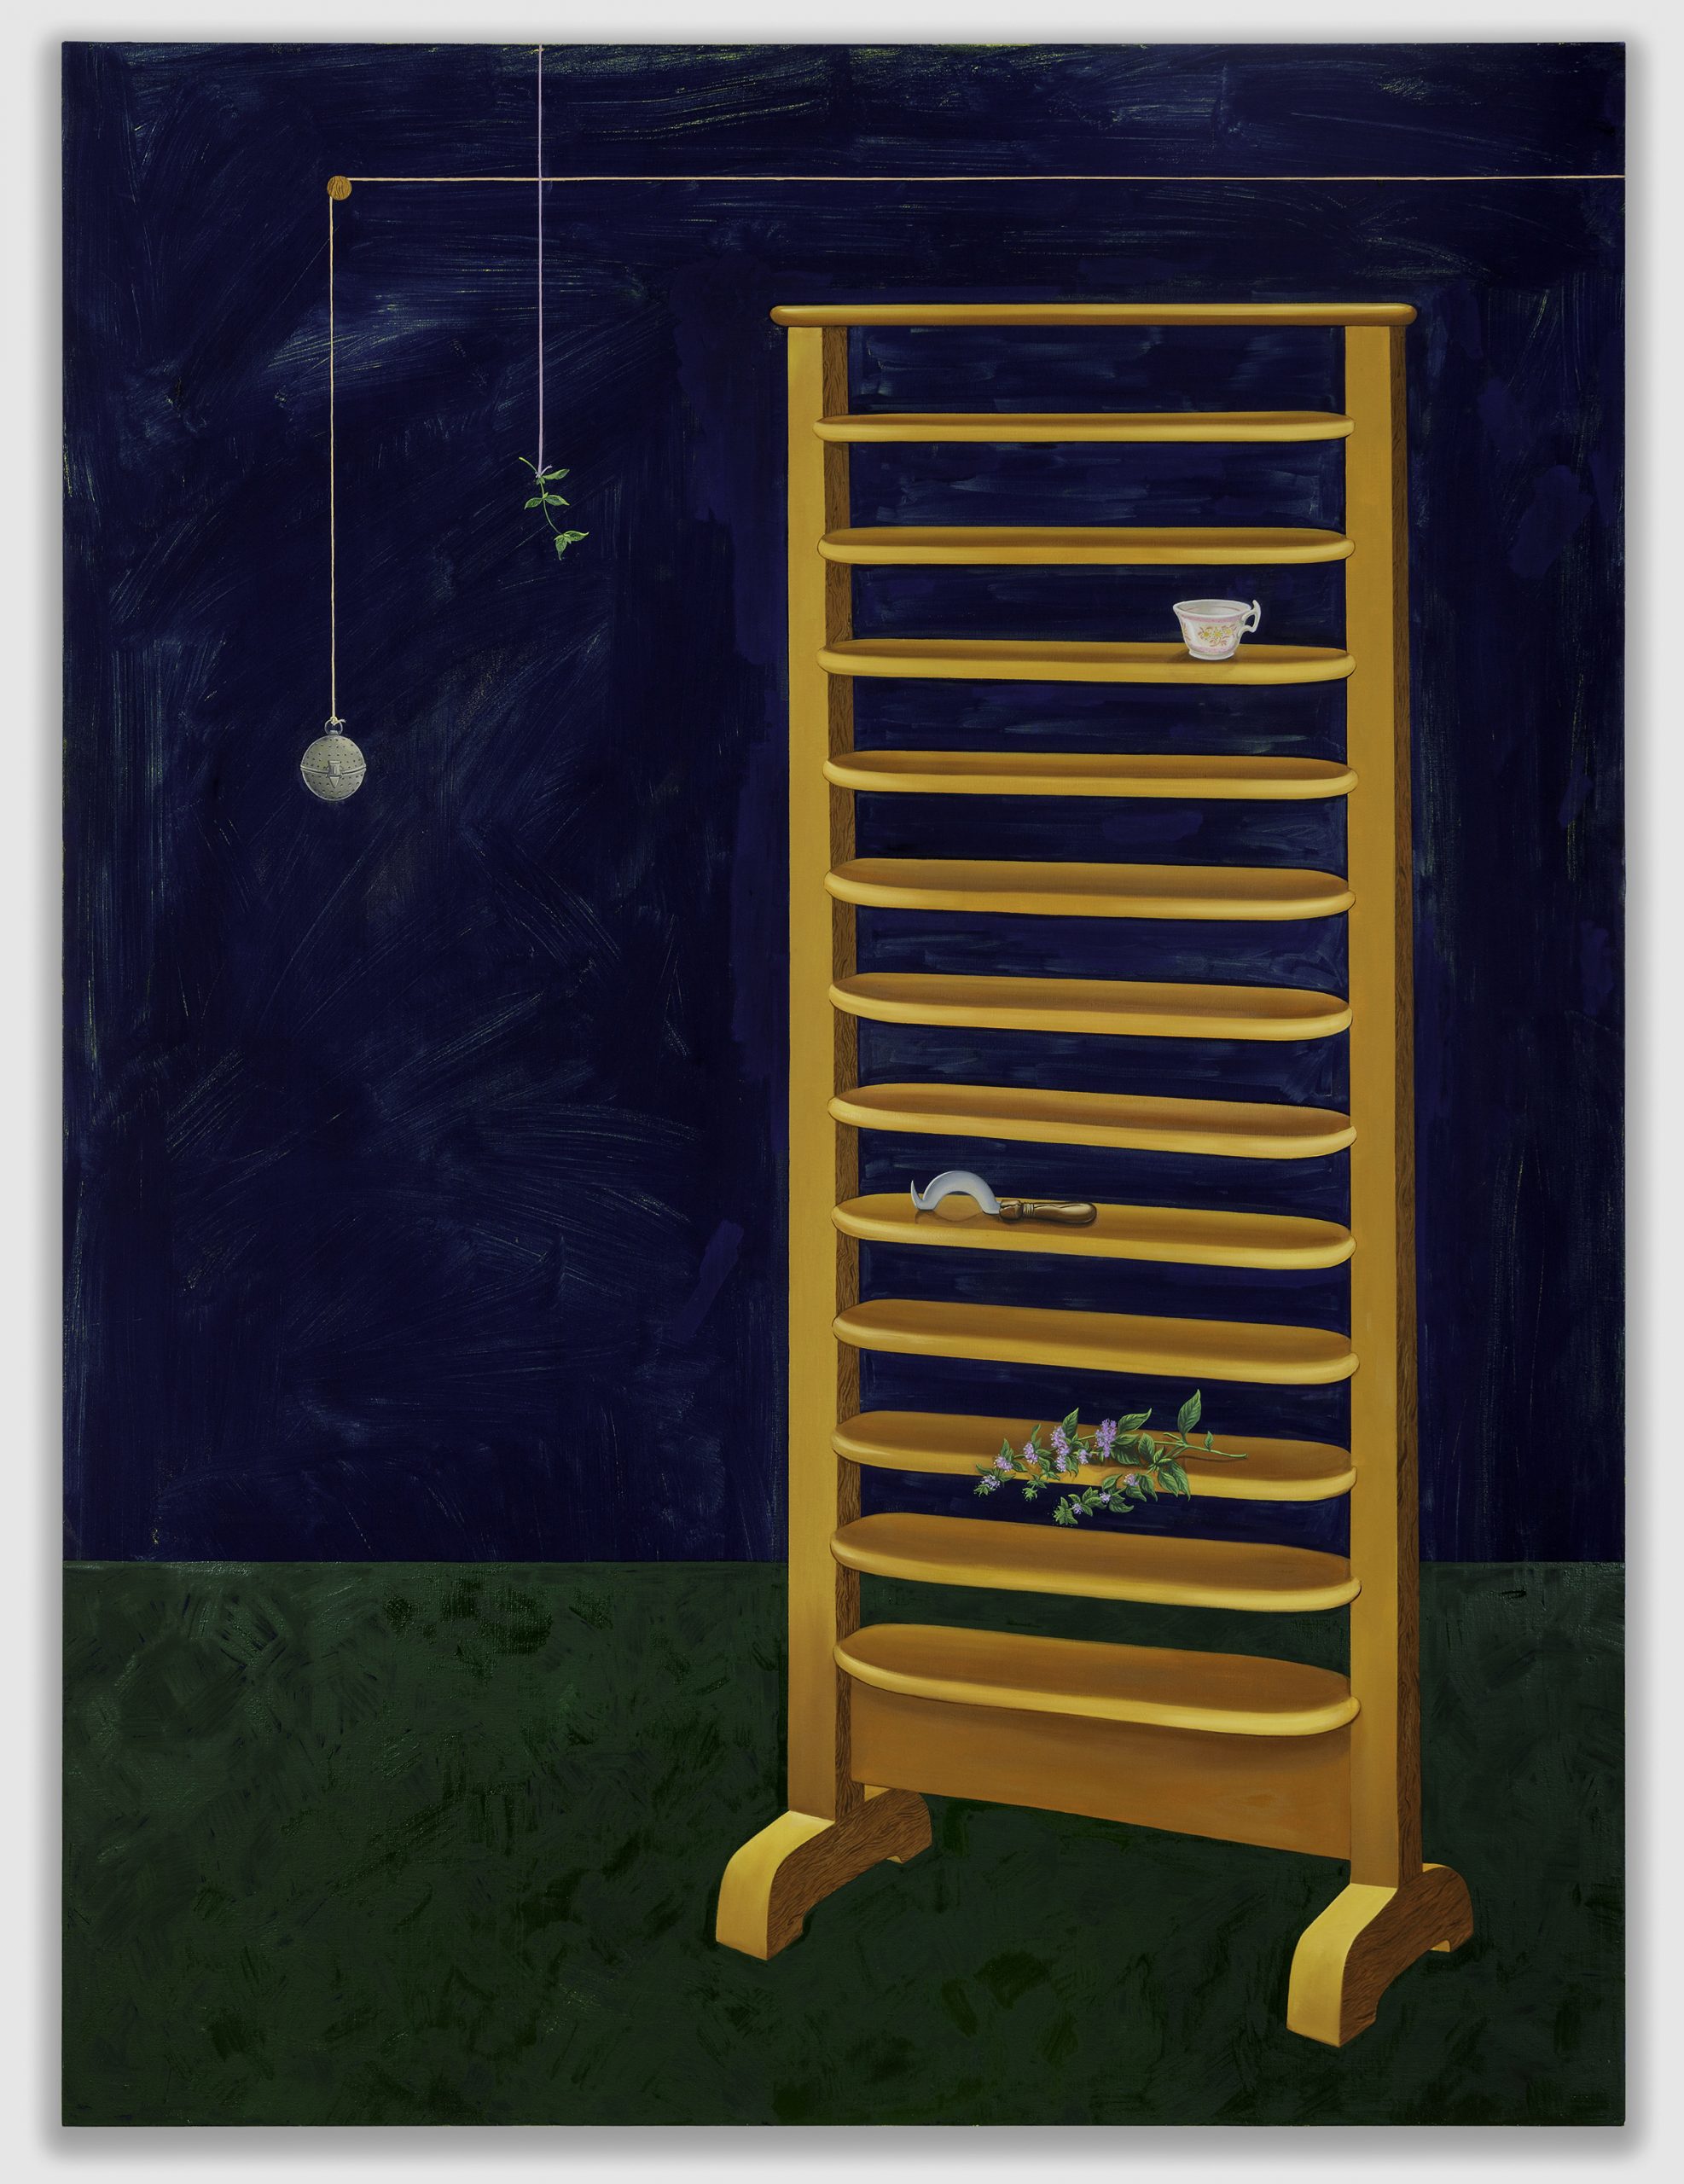 A painting of a wooden rack in front of a dark background.